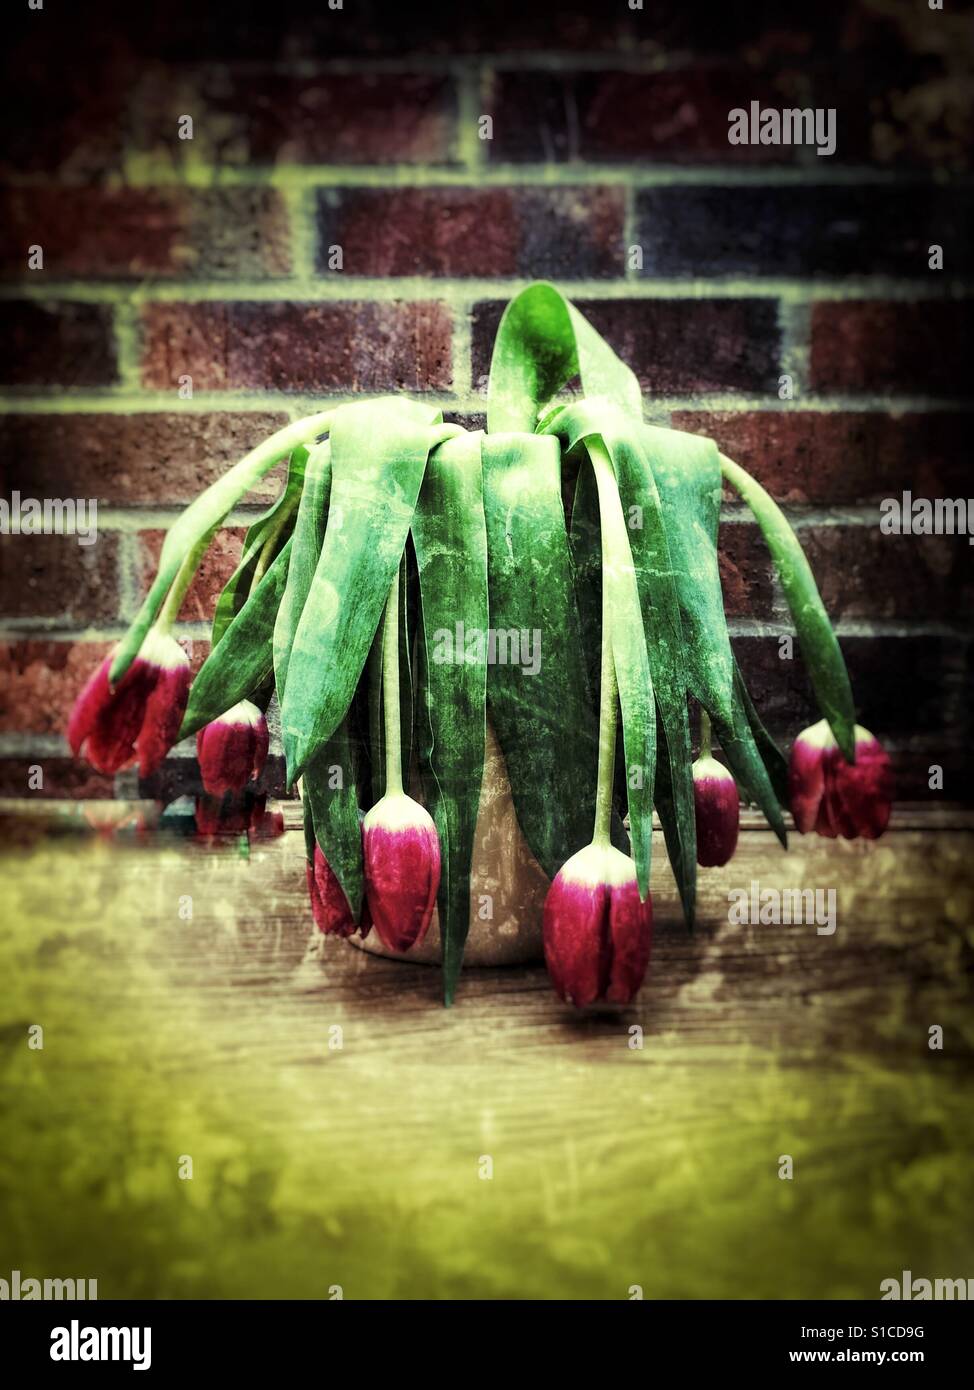 Wilting tulips or flowers looking sad and in need of water and sunlight. Stock Photo